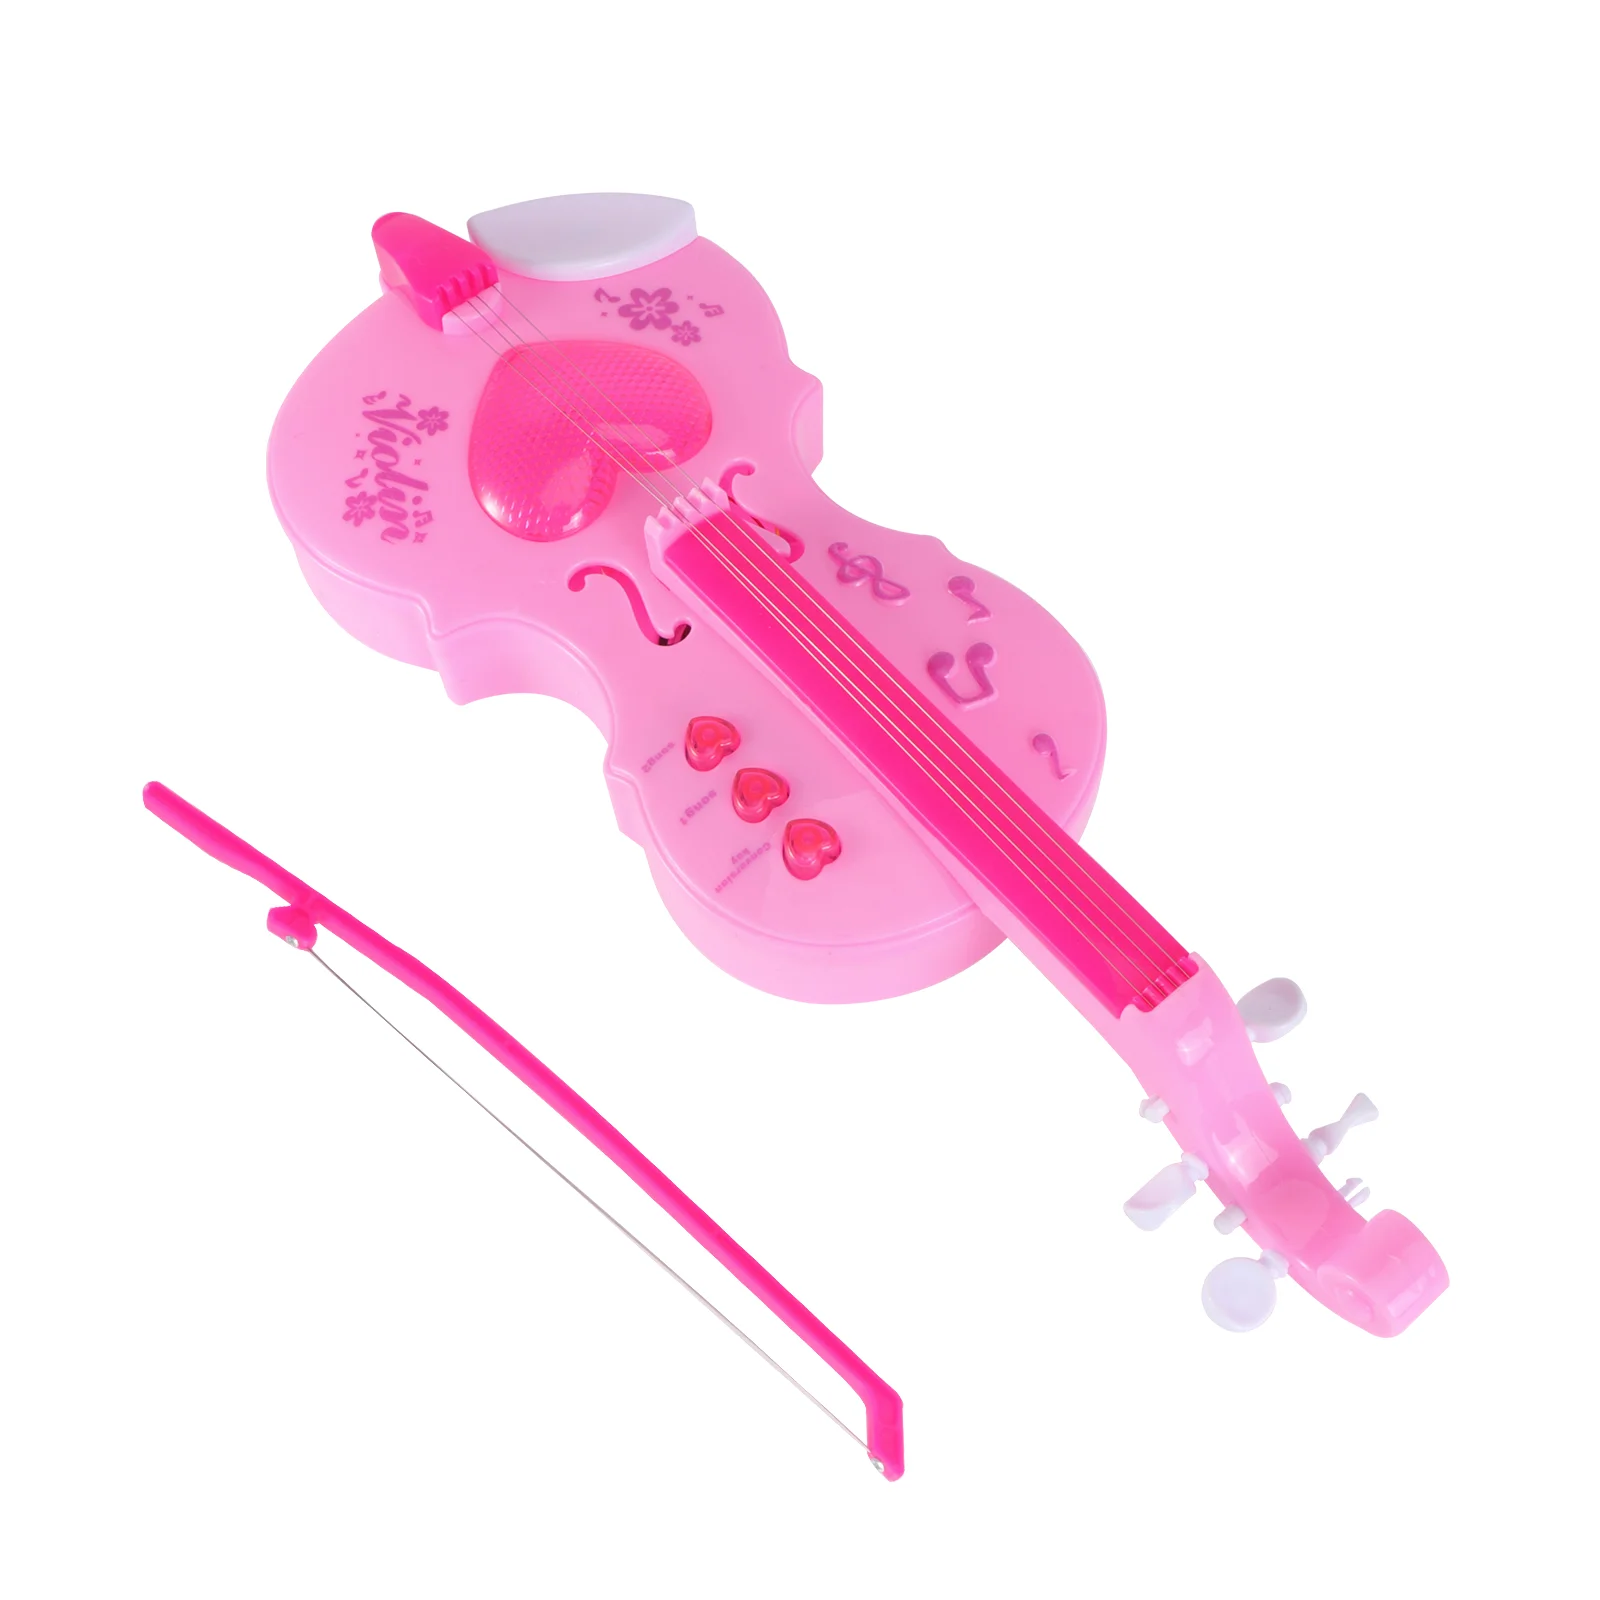 

Imitation Violin Music Enlightenment Toy Children Instrument Educational Plaything Plastic Kids Micro Toys Guitar for